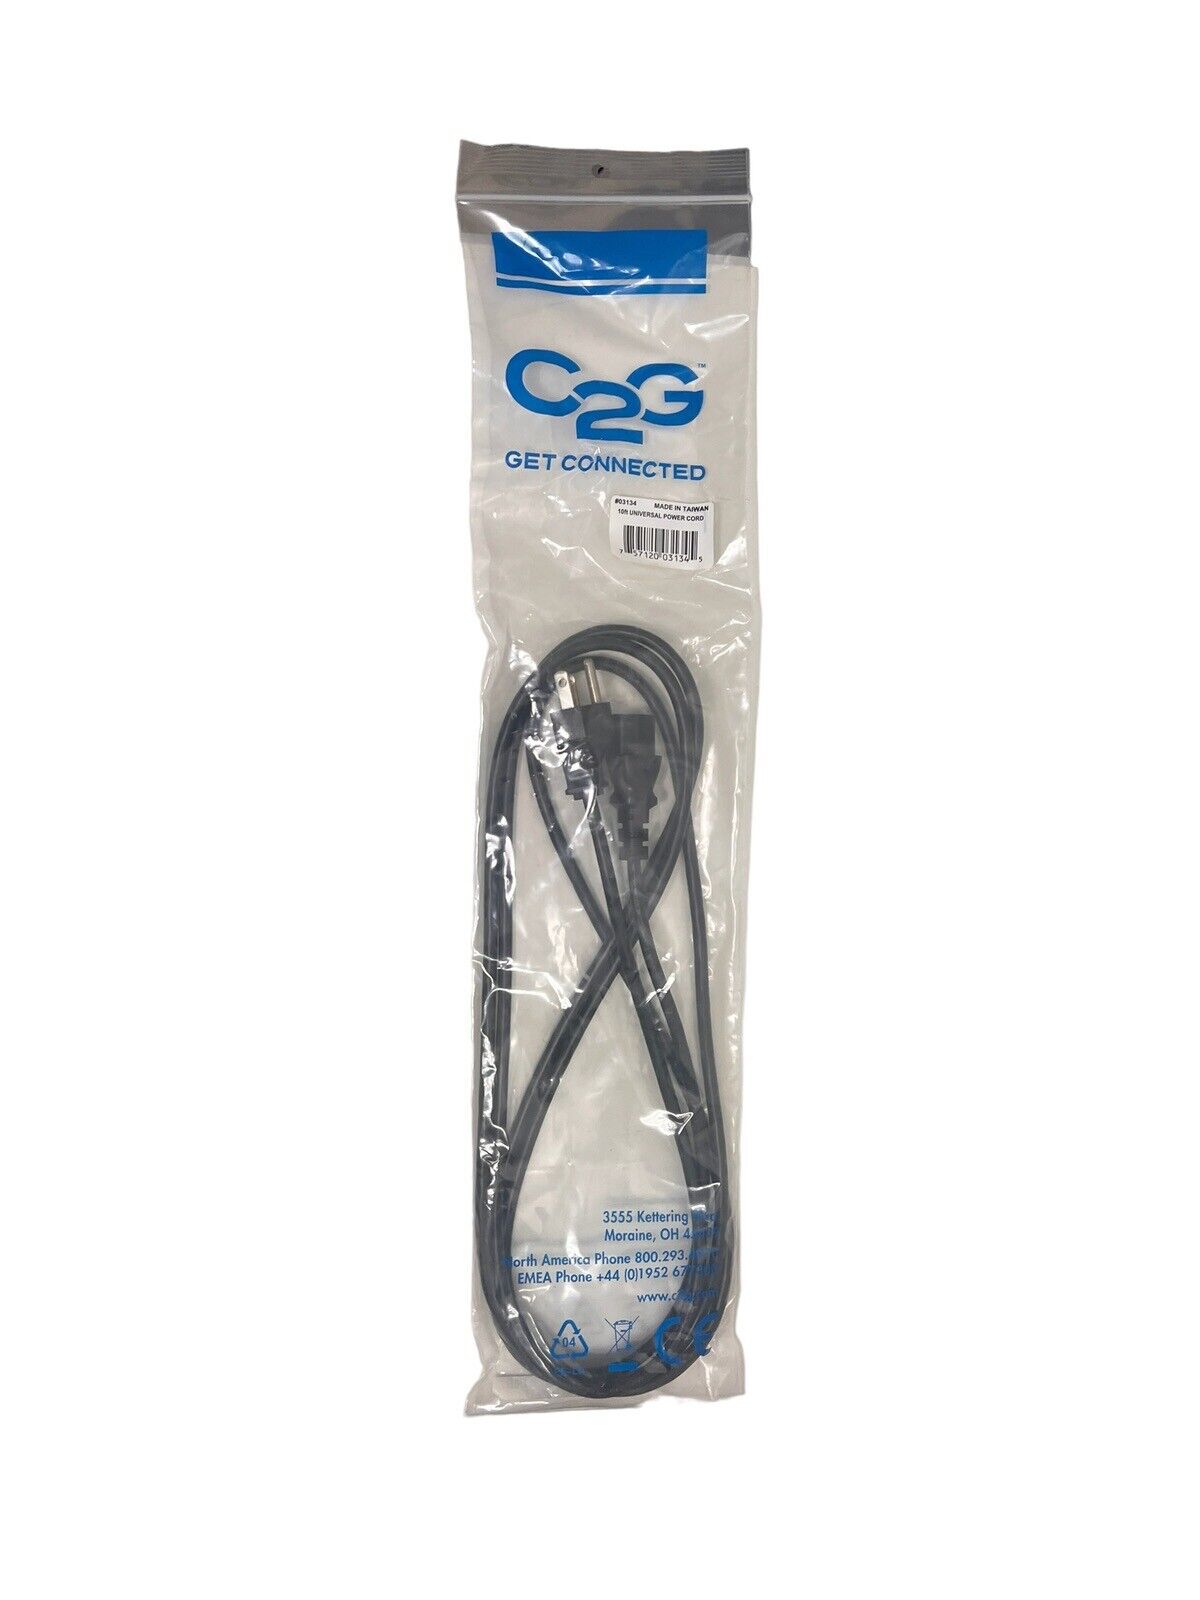 C2G Get Connected 10ft Universal Power Cord